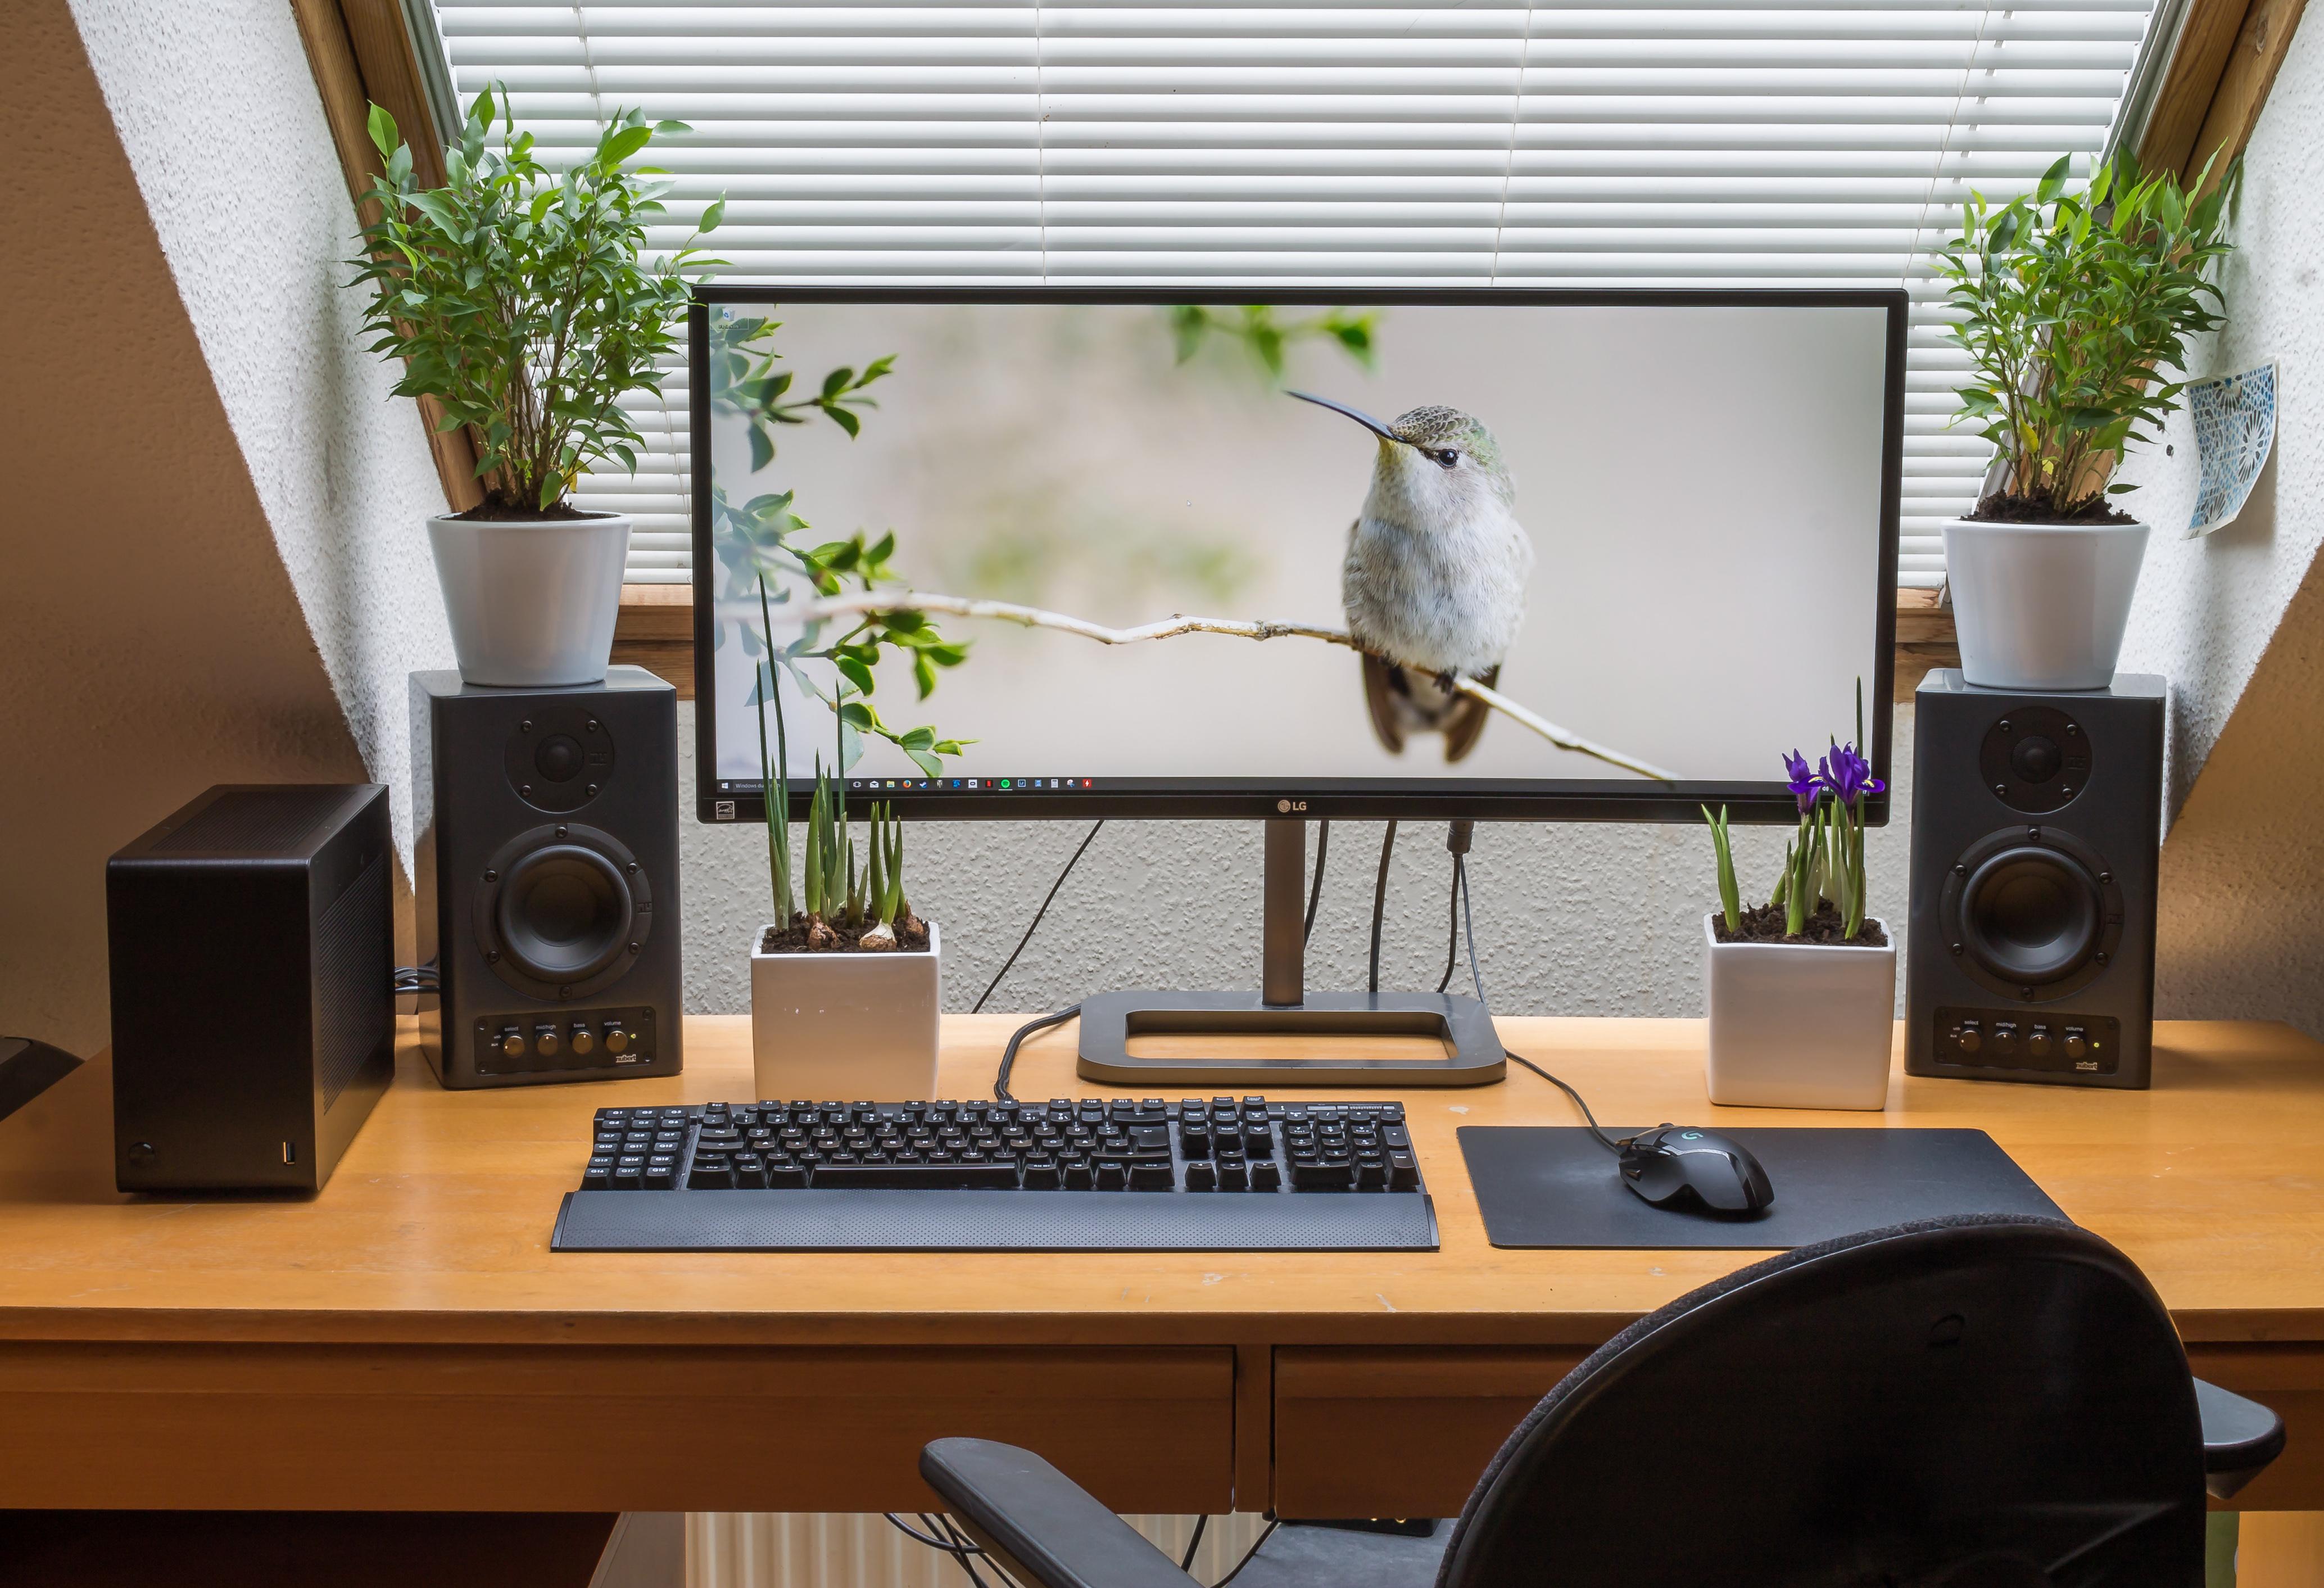 General 4135x2825 workspace computer monitor desk speakers keyboards plant pot plants blinds technology computer mice display